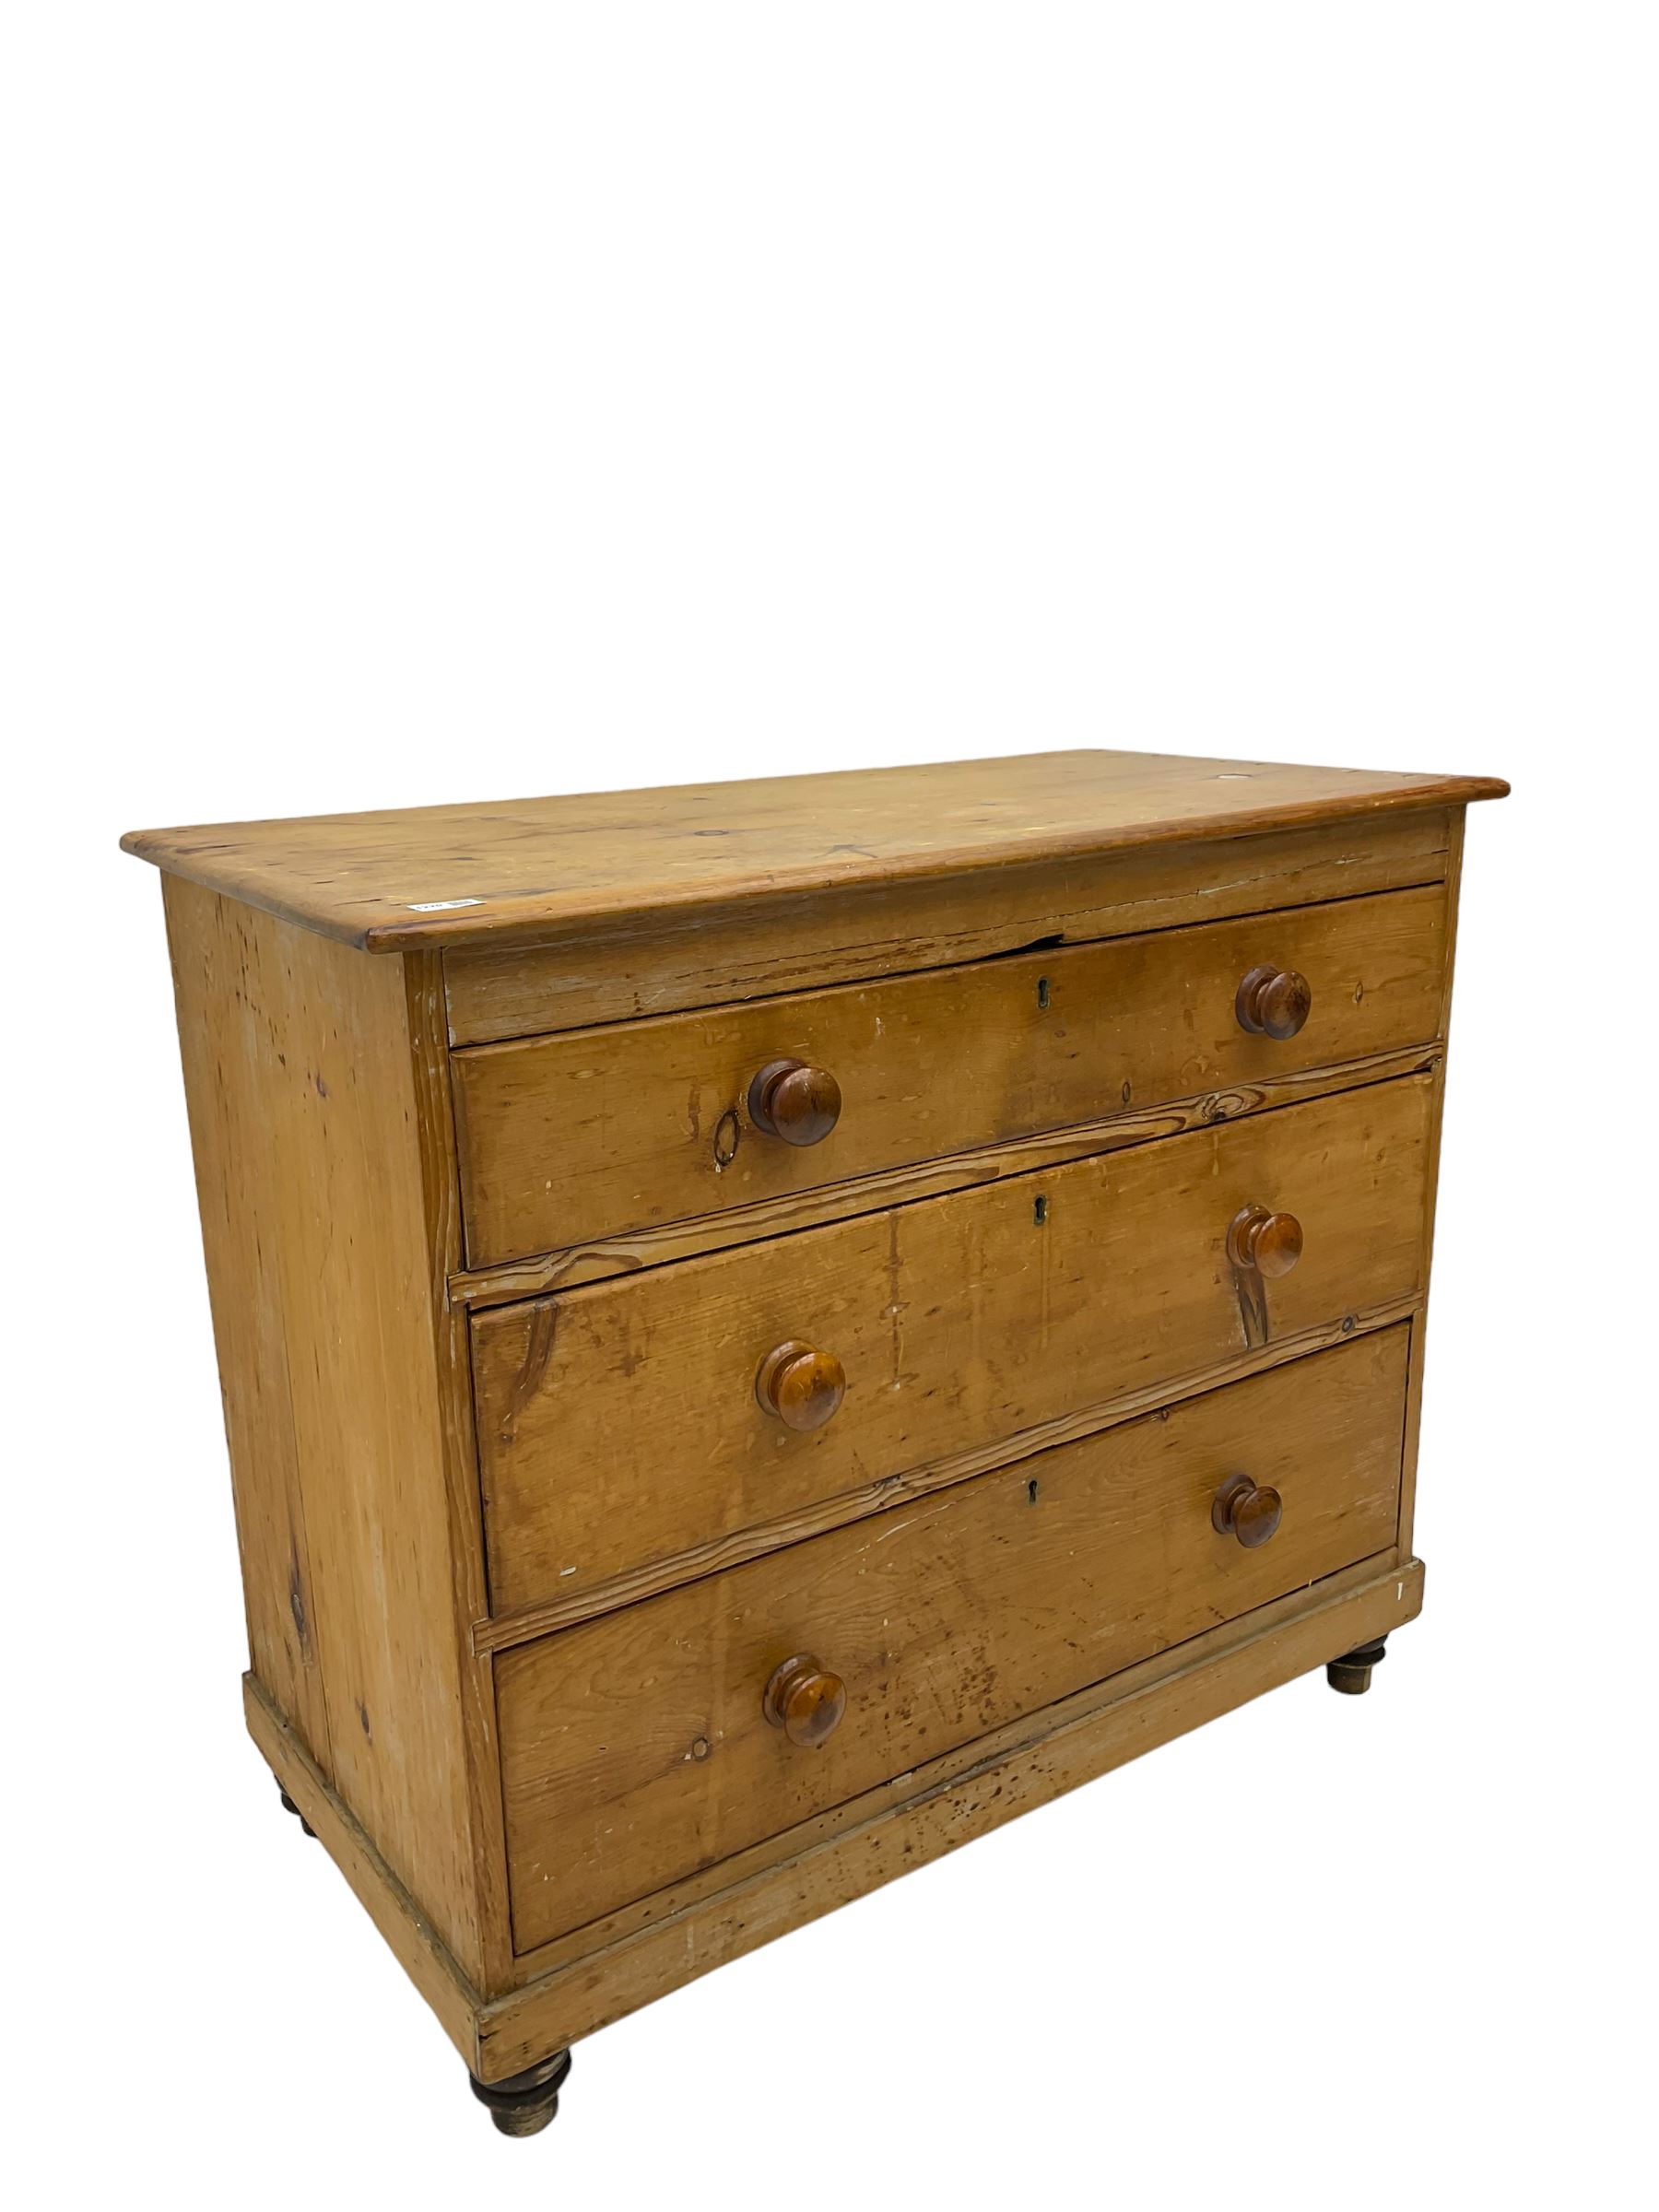 Victorian waxed pine chest - Image 3 of 7